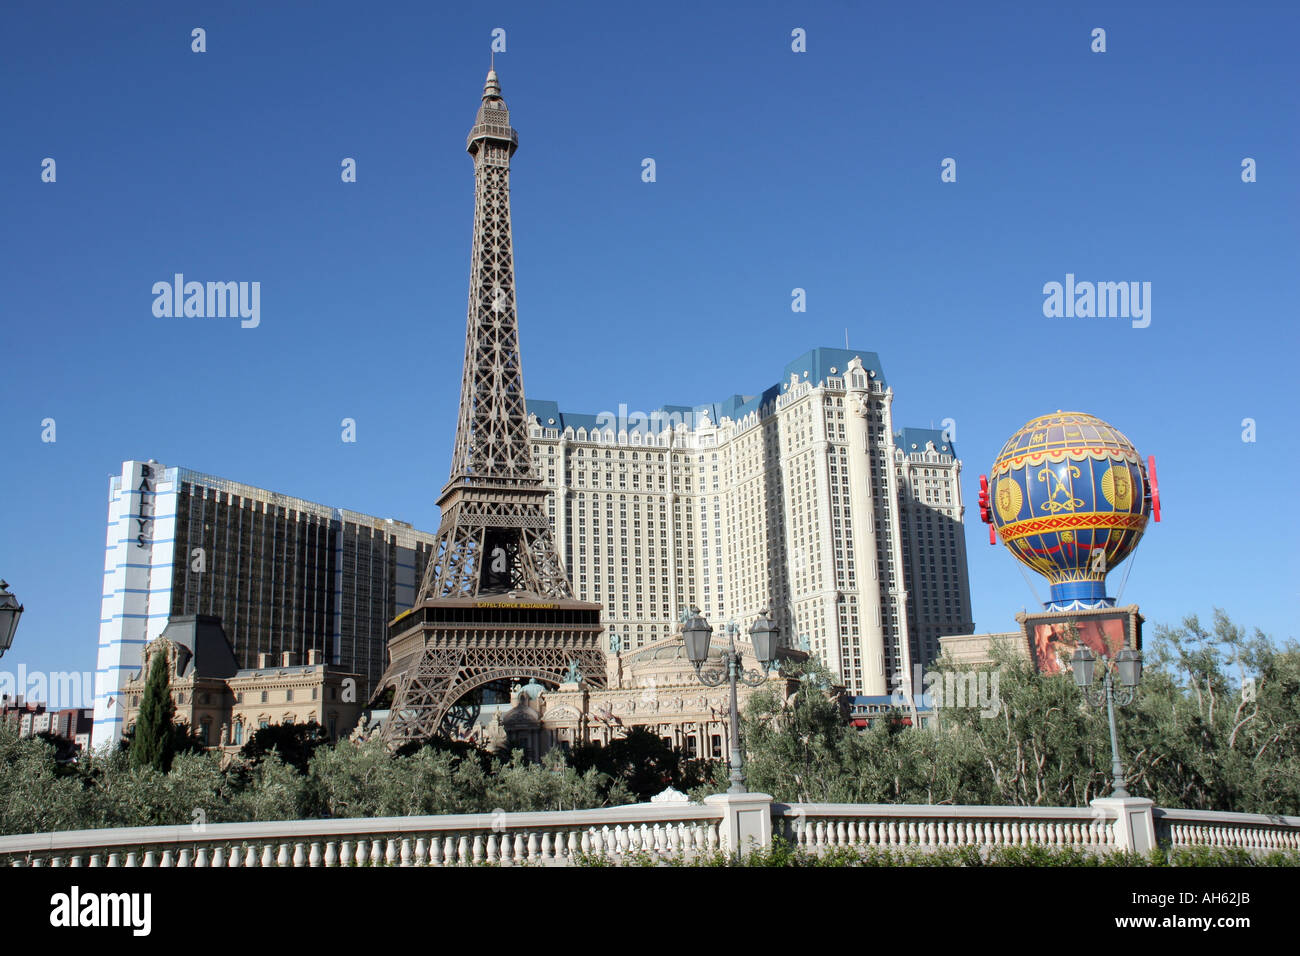 File:The hotel Paris Las Vegas as seen from the hotel The Bellagio.jpg -  Wikimedia Commons